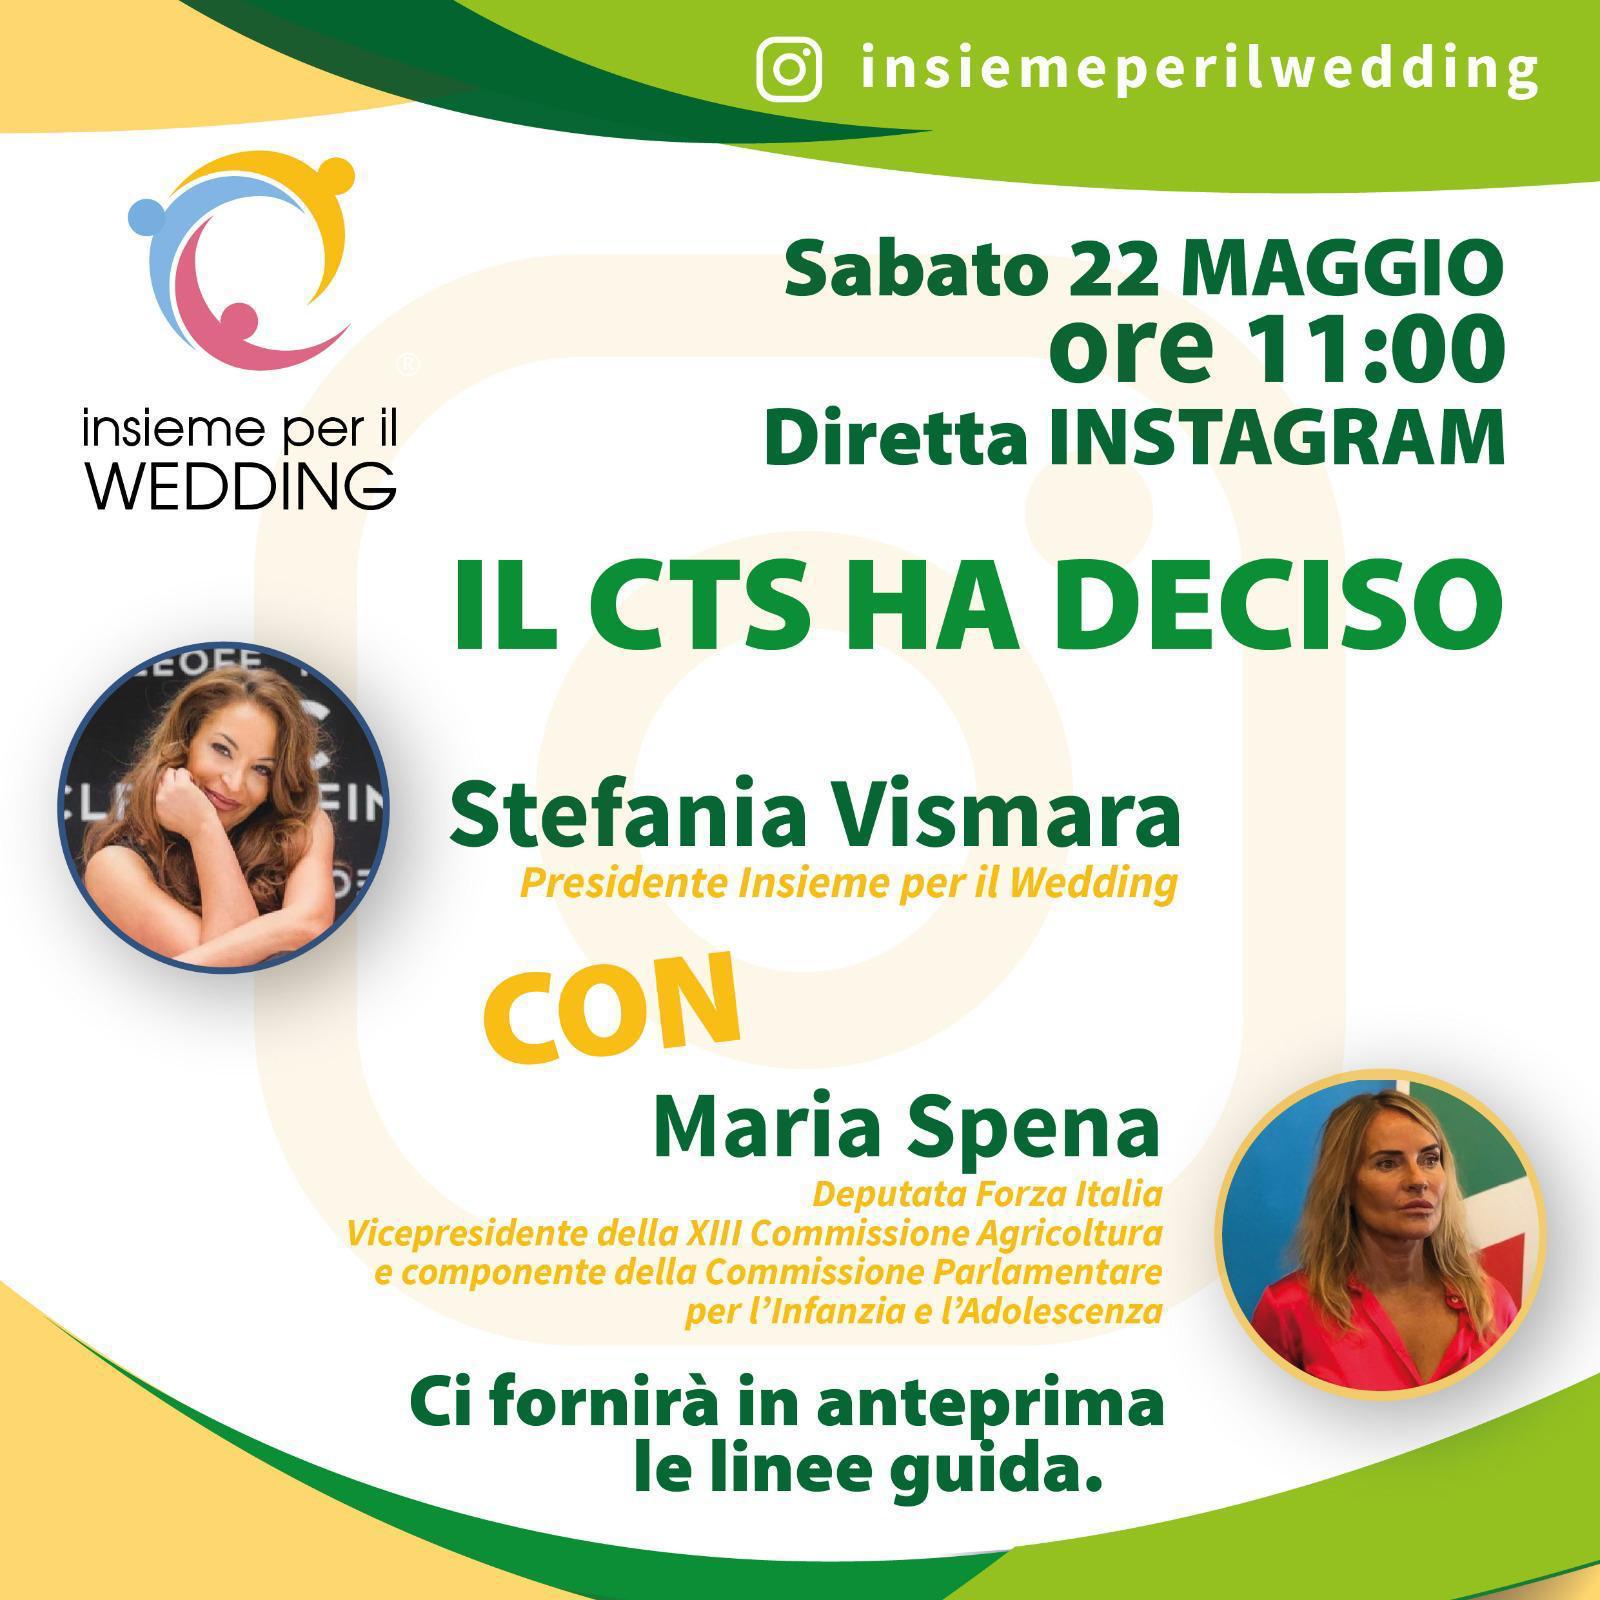 THE Scientific Technical Committee (CTS) HAS DECIDED THE RULES OF WEDDINGS IN ITALY